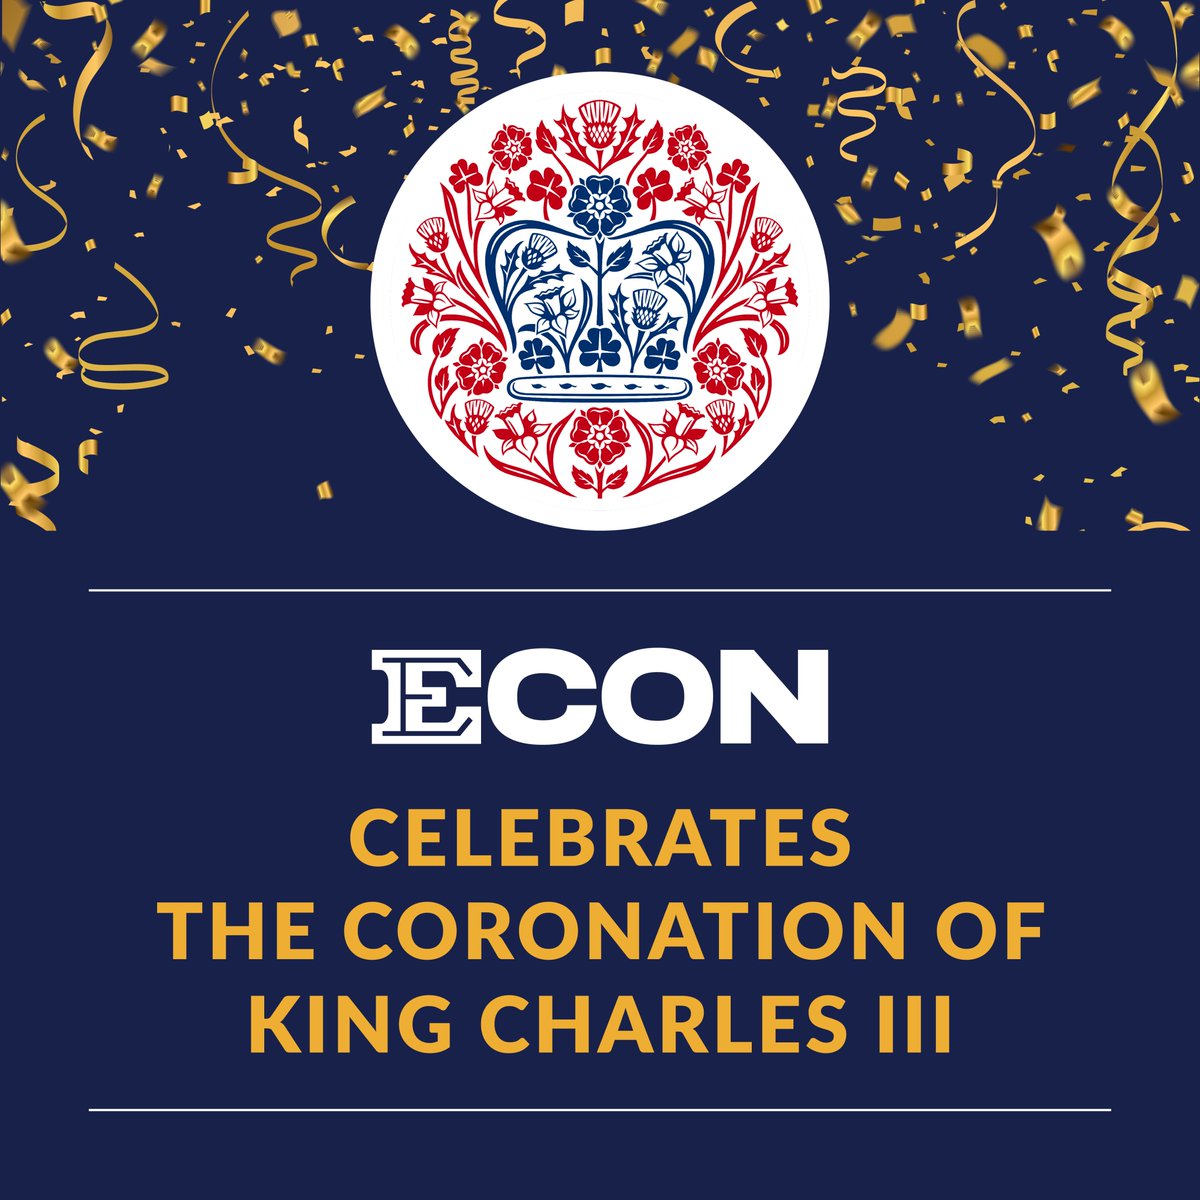 Tomorrow, our machines will once again have the honour of laying the sand on the roads of central London for King Charles III's coronation – making the surface suitable for the royal horses and procession. We can't wait to be involved in another momentous national occasion🇬🇧👑